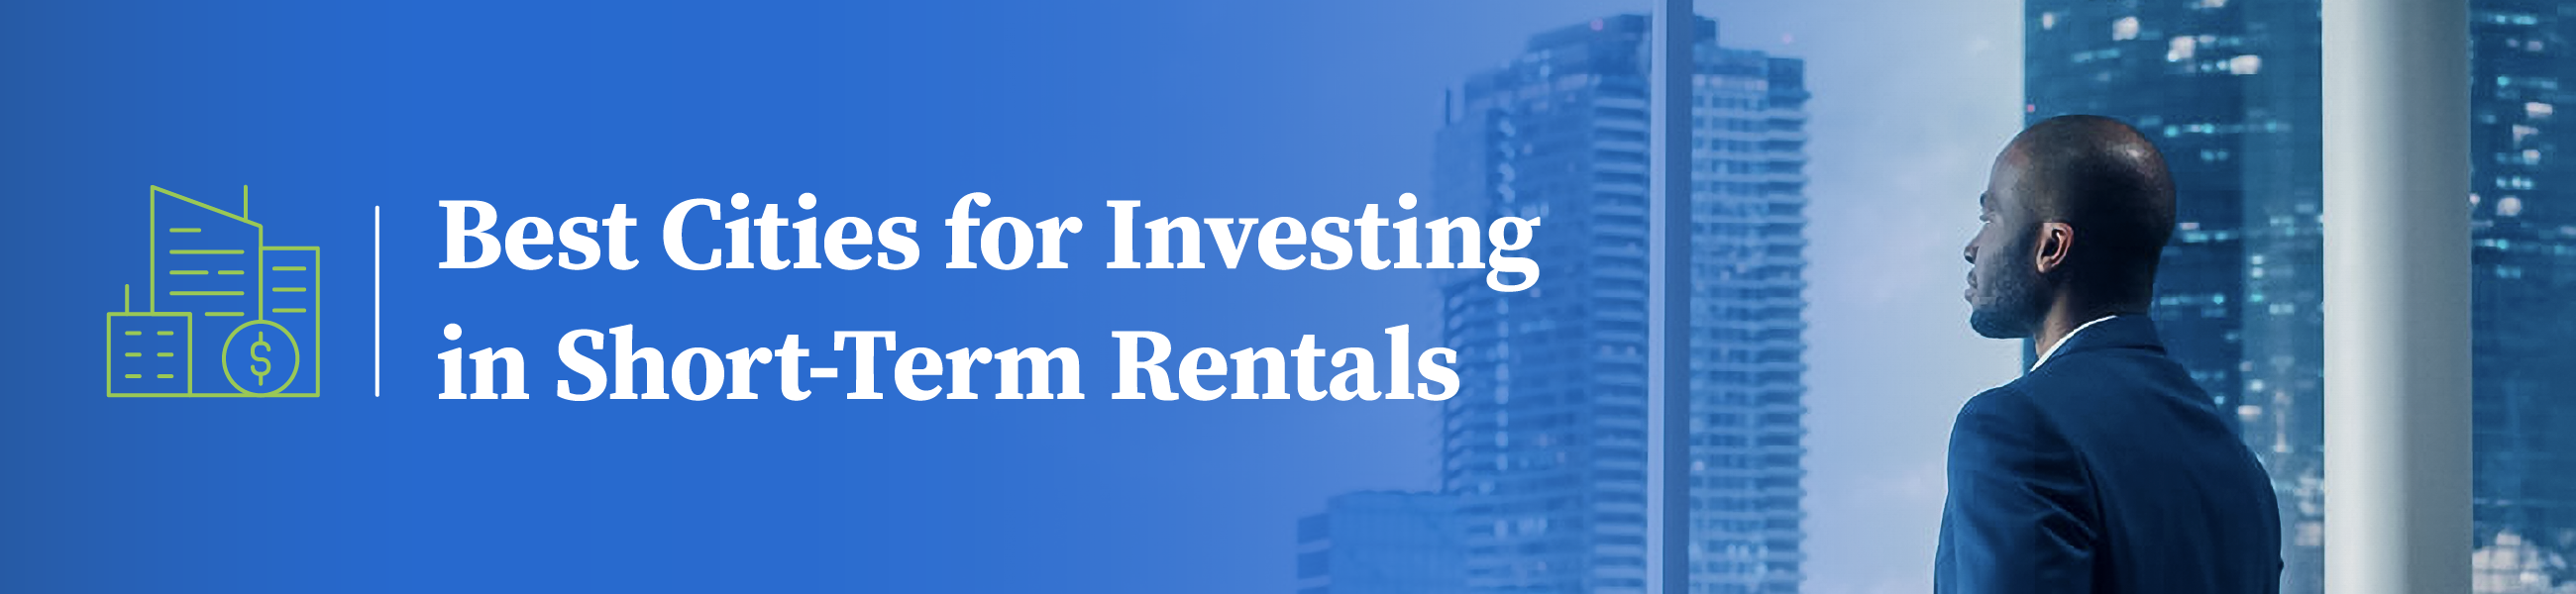 Best cities for investing in short-term rentals